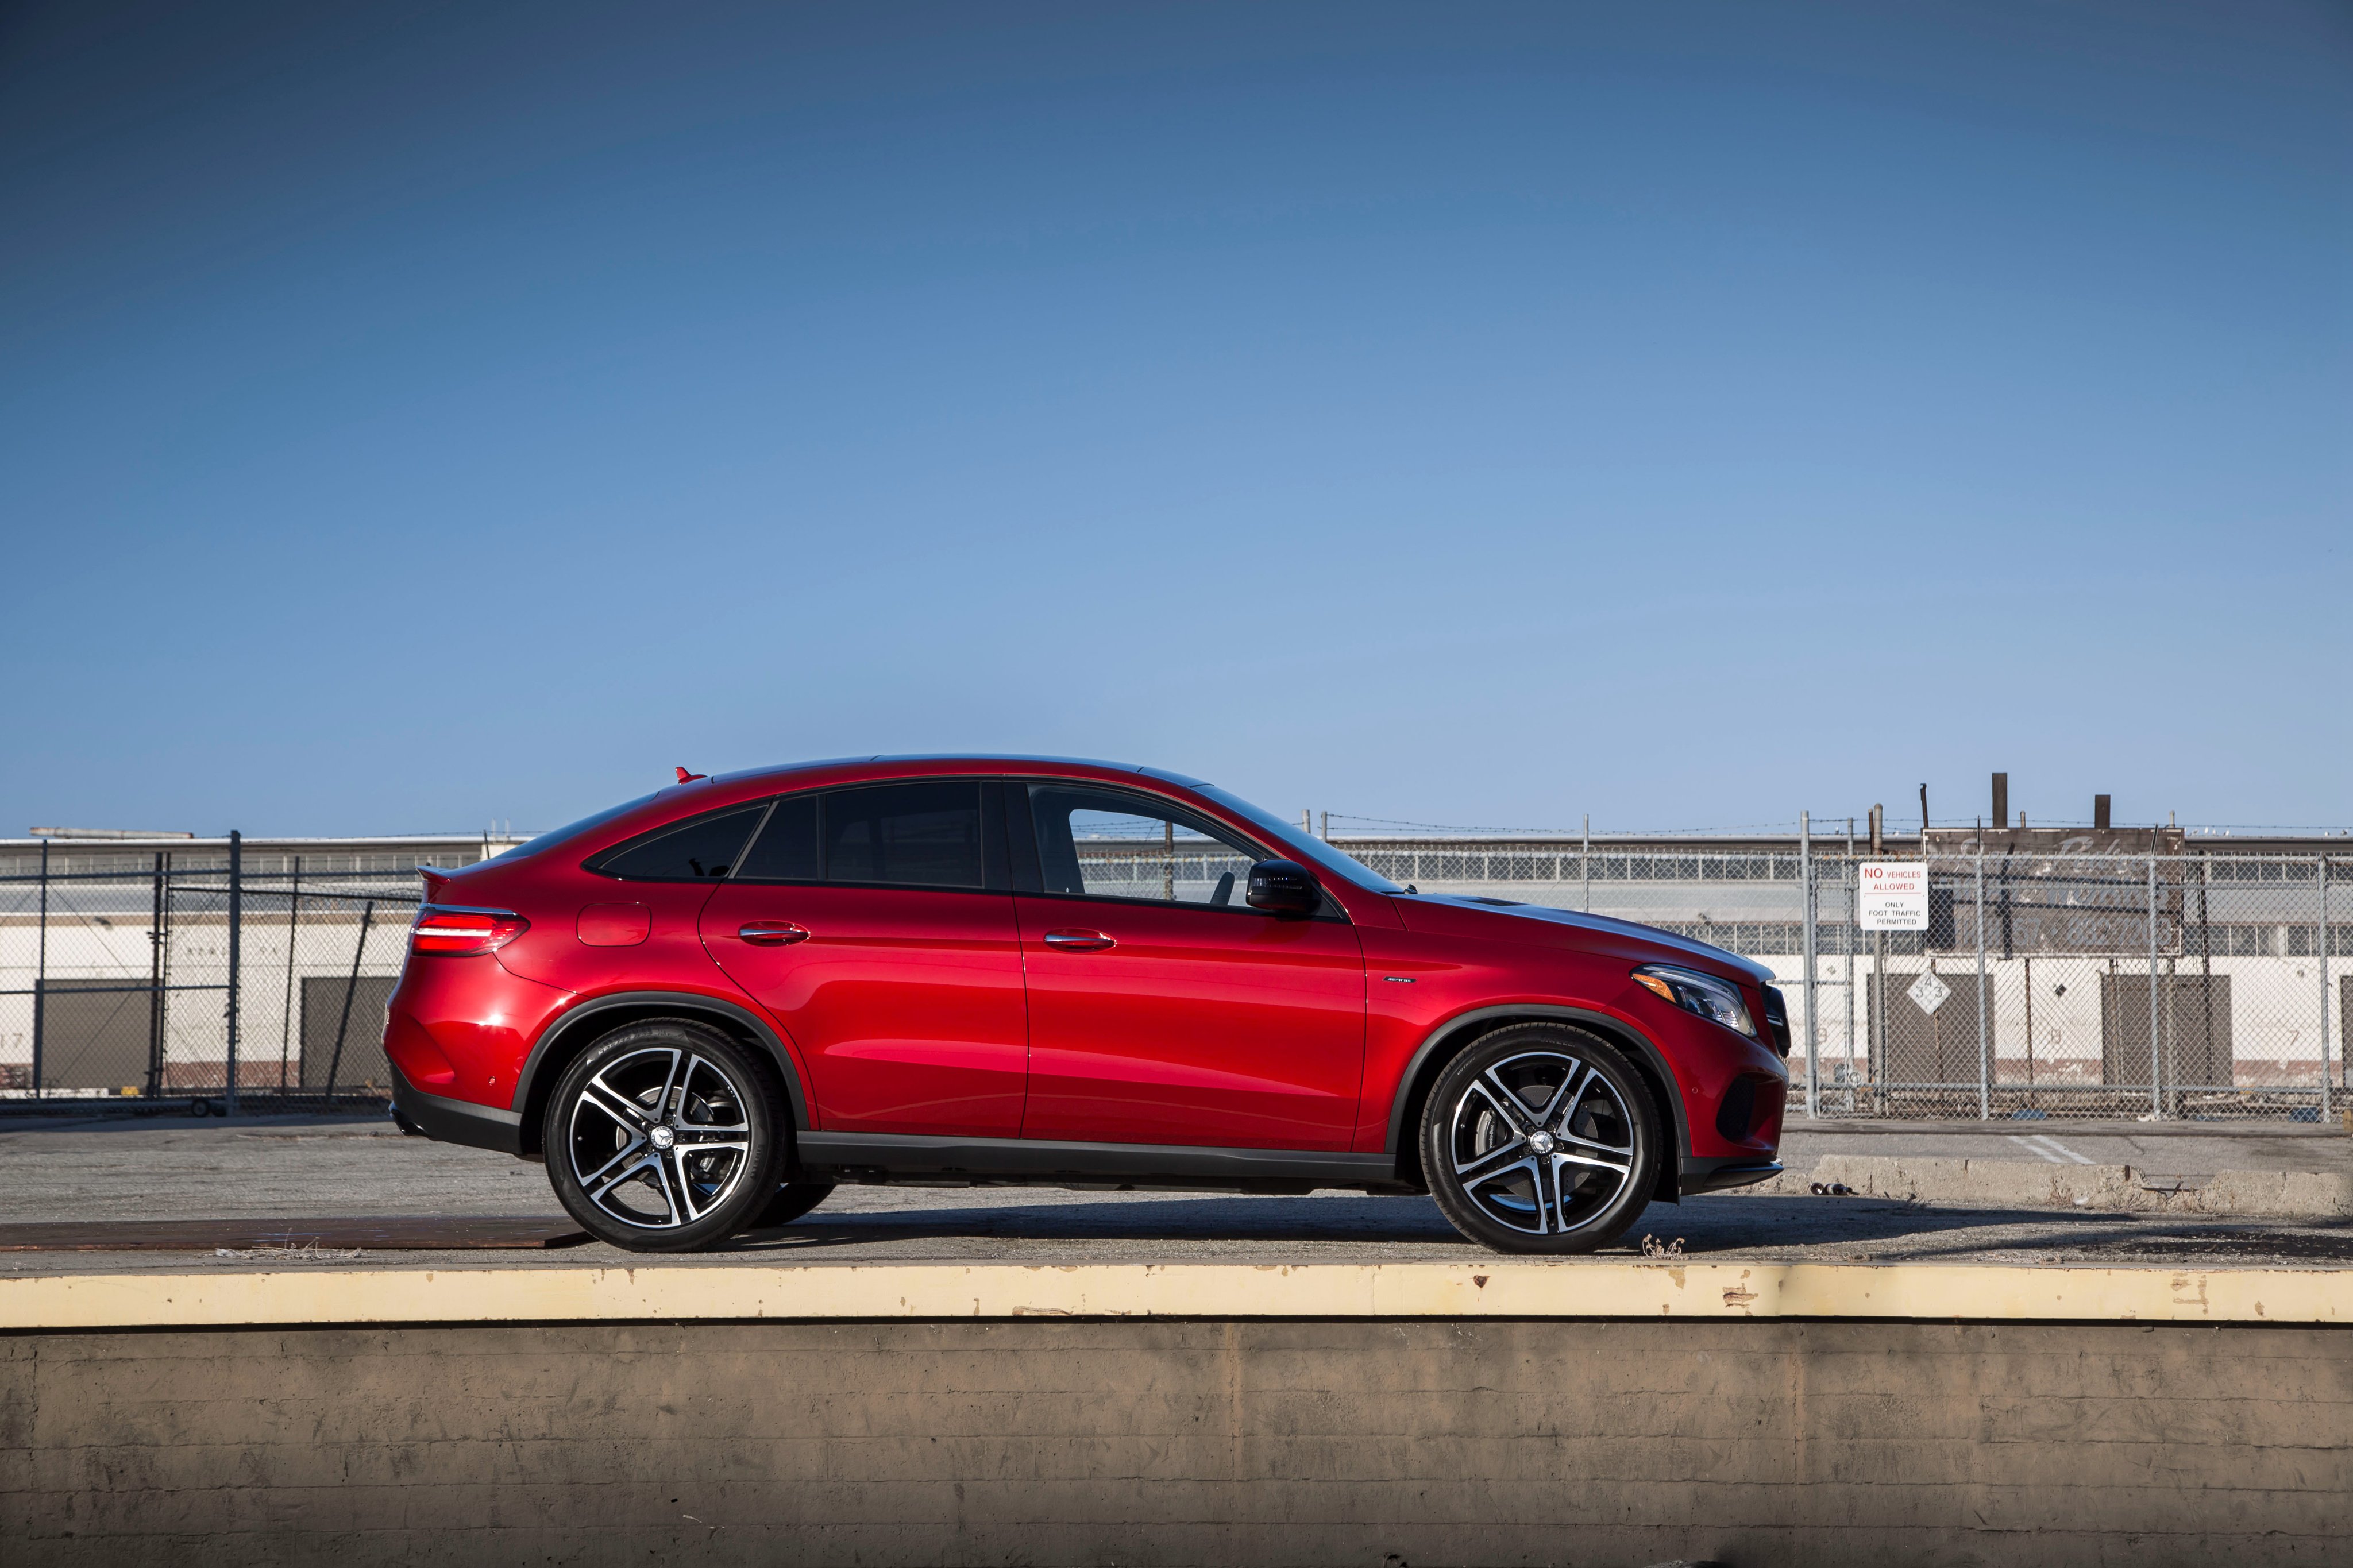 2016, Mercedes, Gle, 450, Amg, 4matic, Coupe, Us spec, Cars, Suv, 2015 Wallpaper